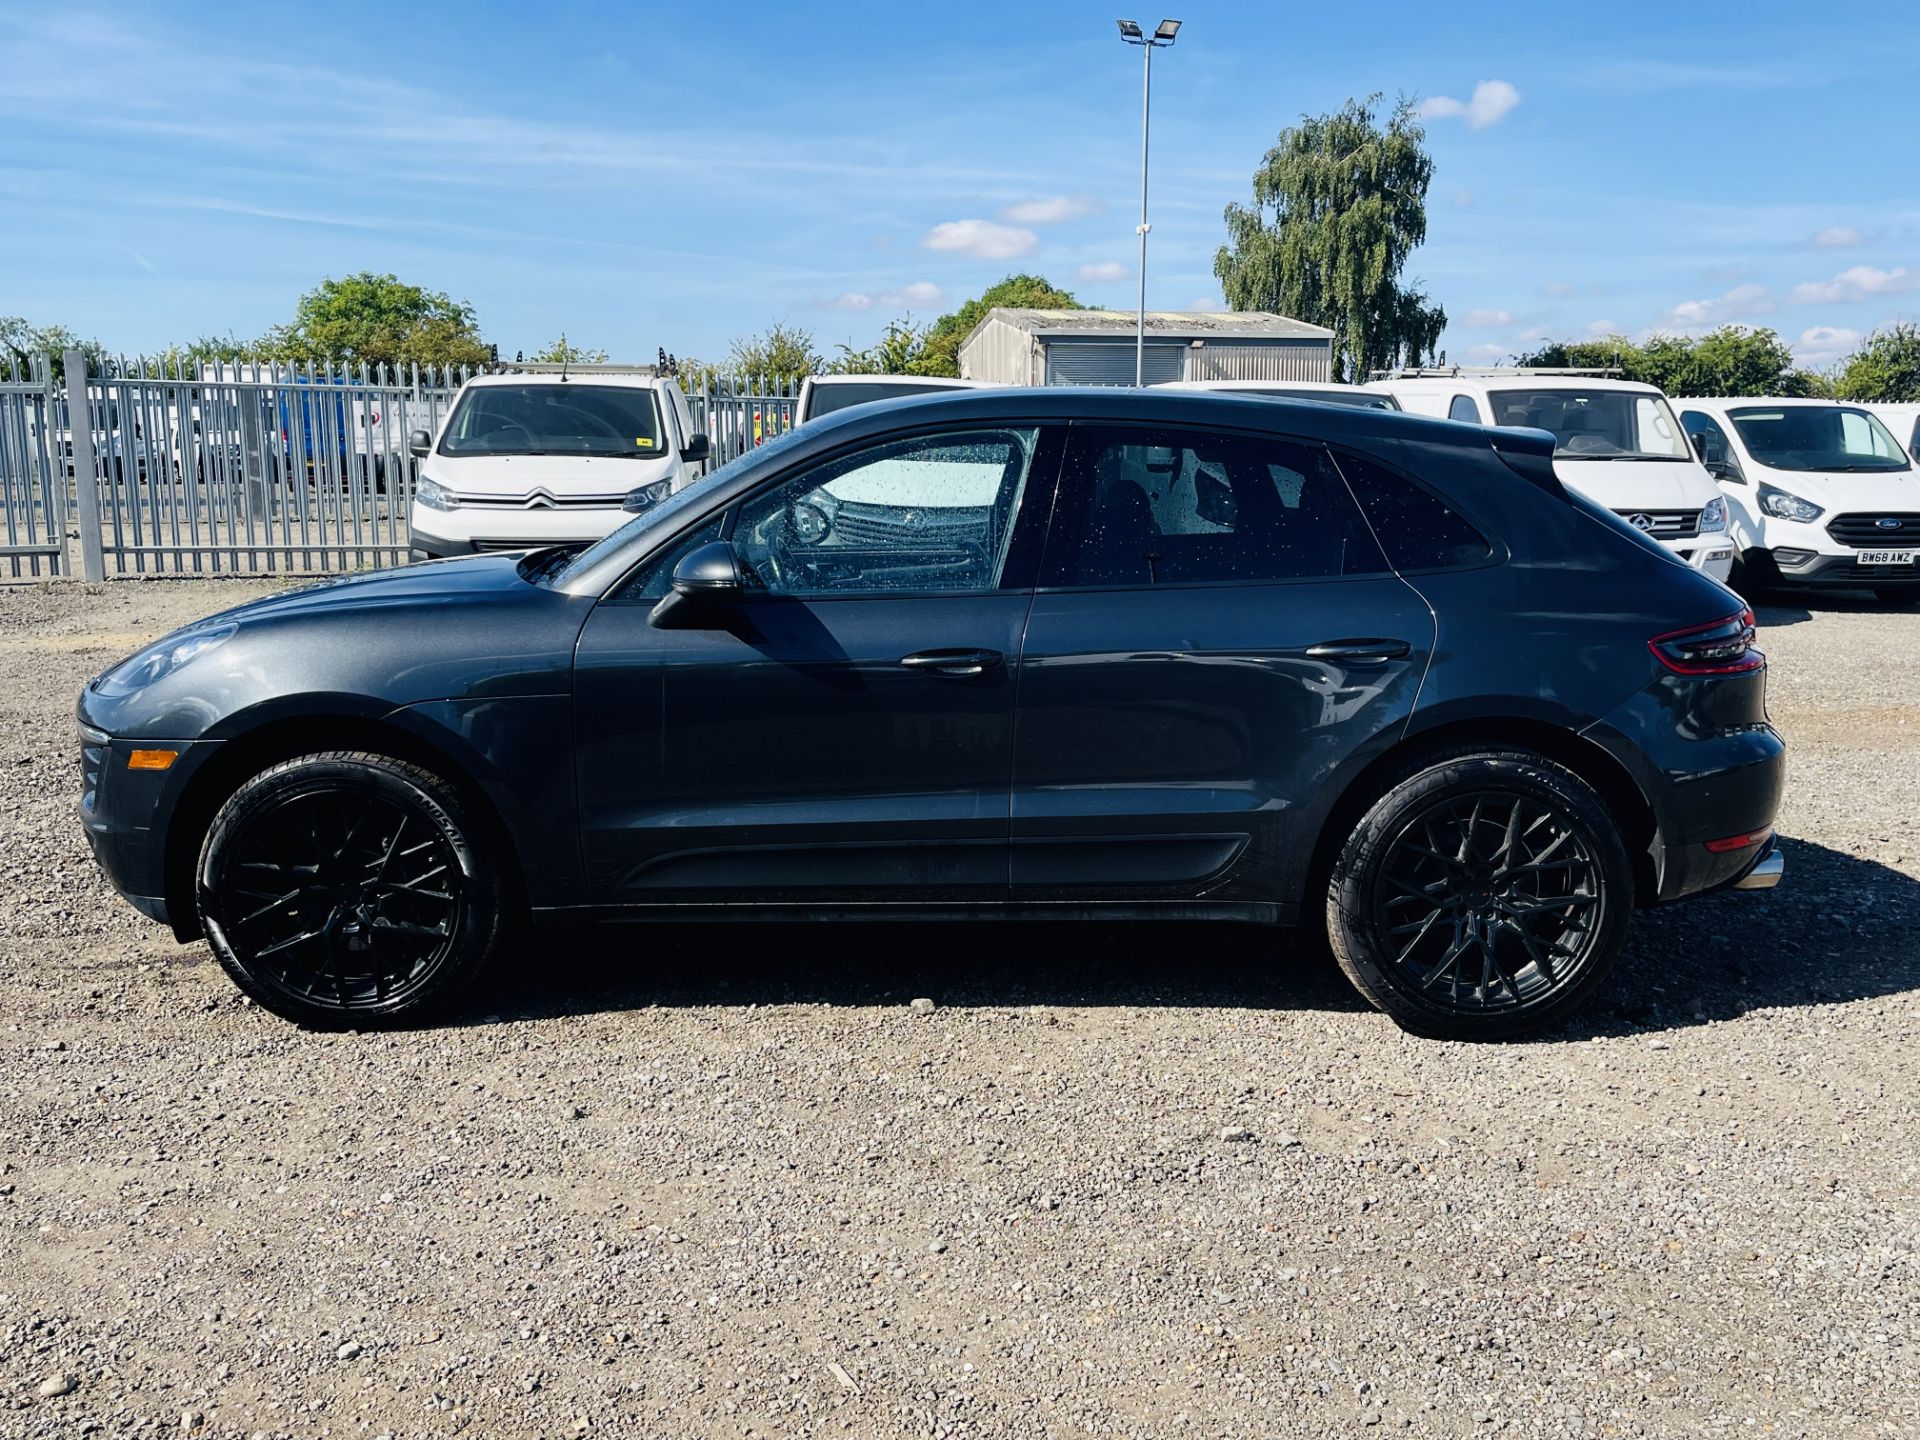 ** ON SALE ** Porsche Macan S 2.0L AWD PDK '2018 Year' Sat Nav - ULEZ Compliant - Only 54,624 Miles - Image 5 of 45